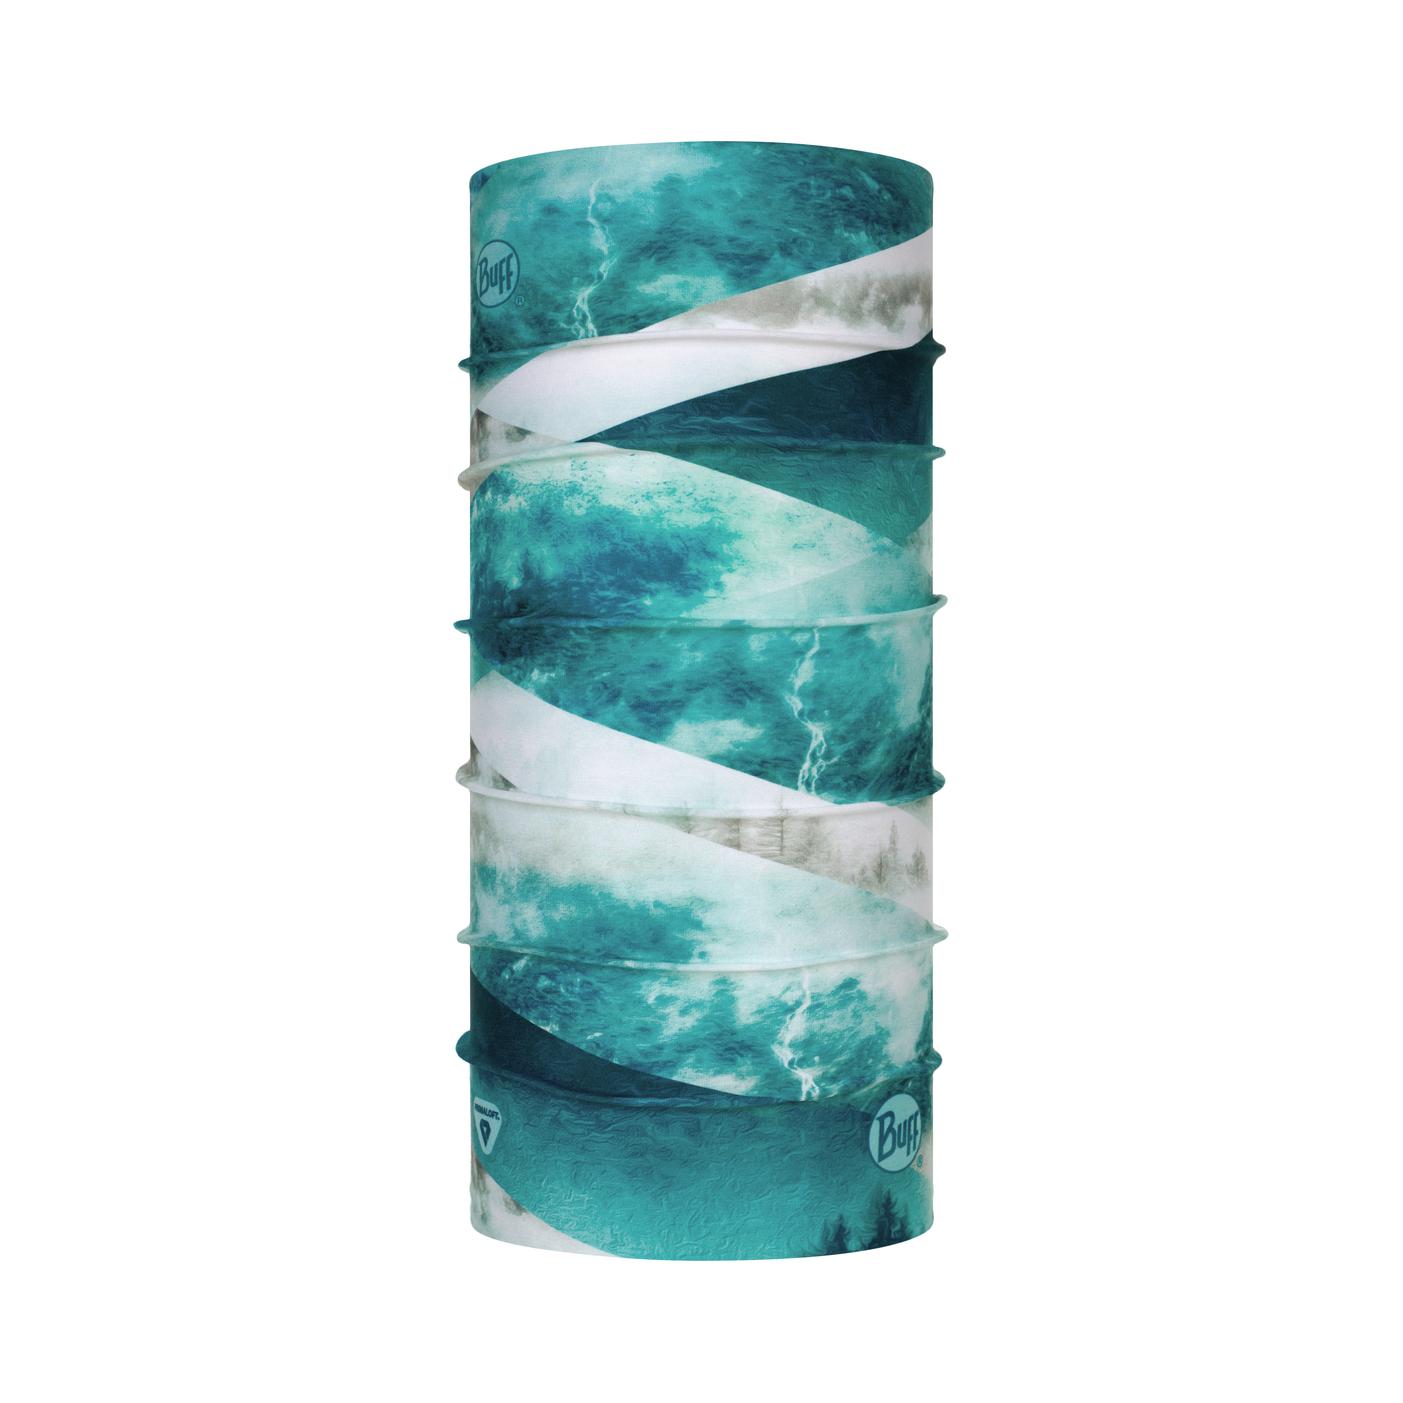 BUFF Thermonet Turquoise 